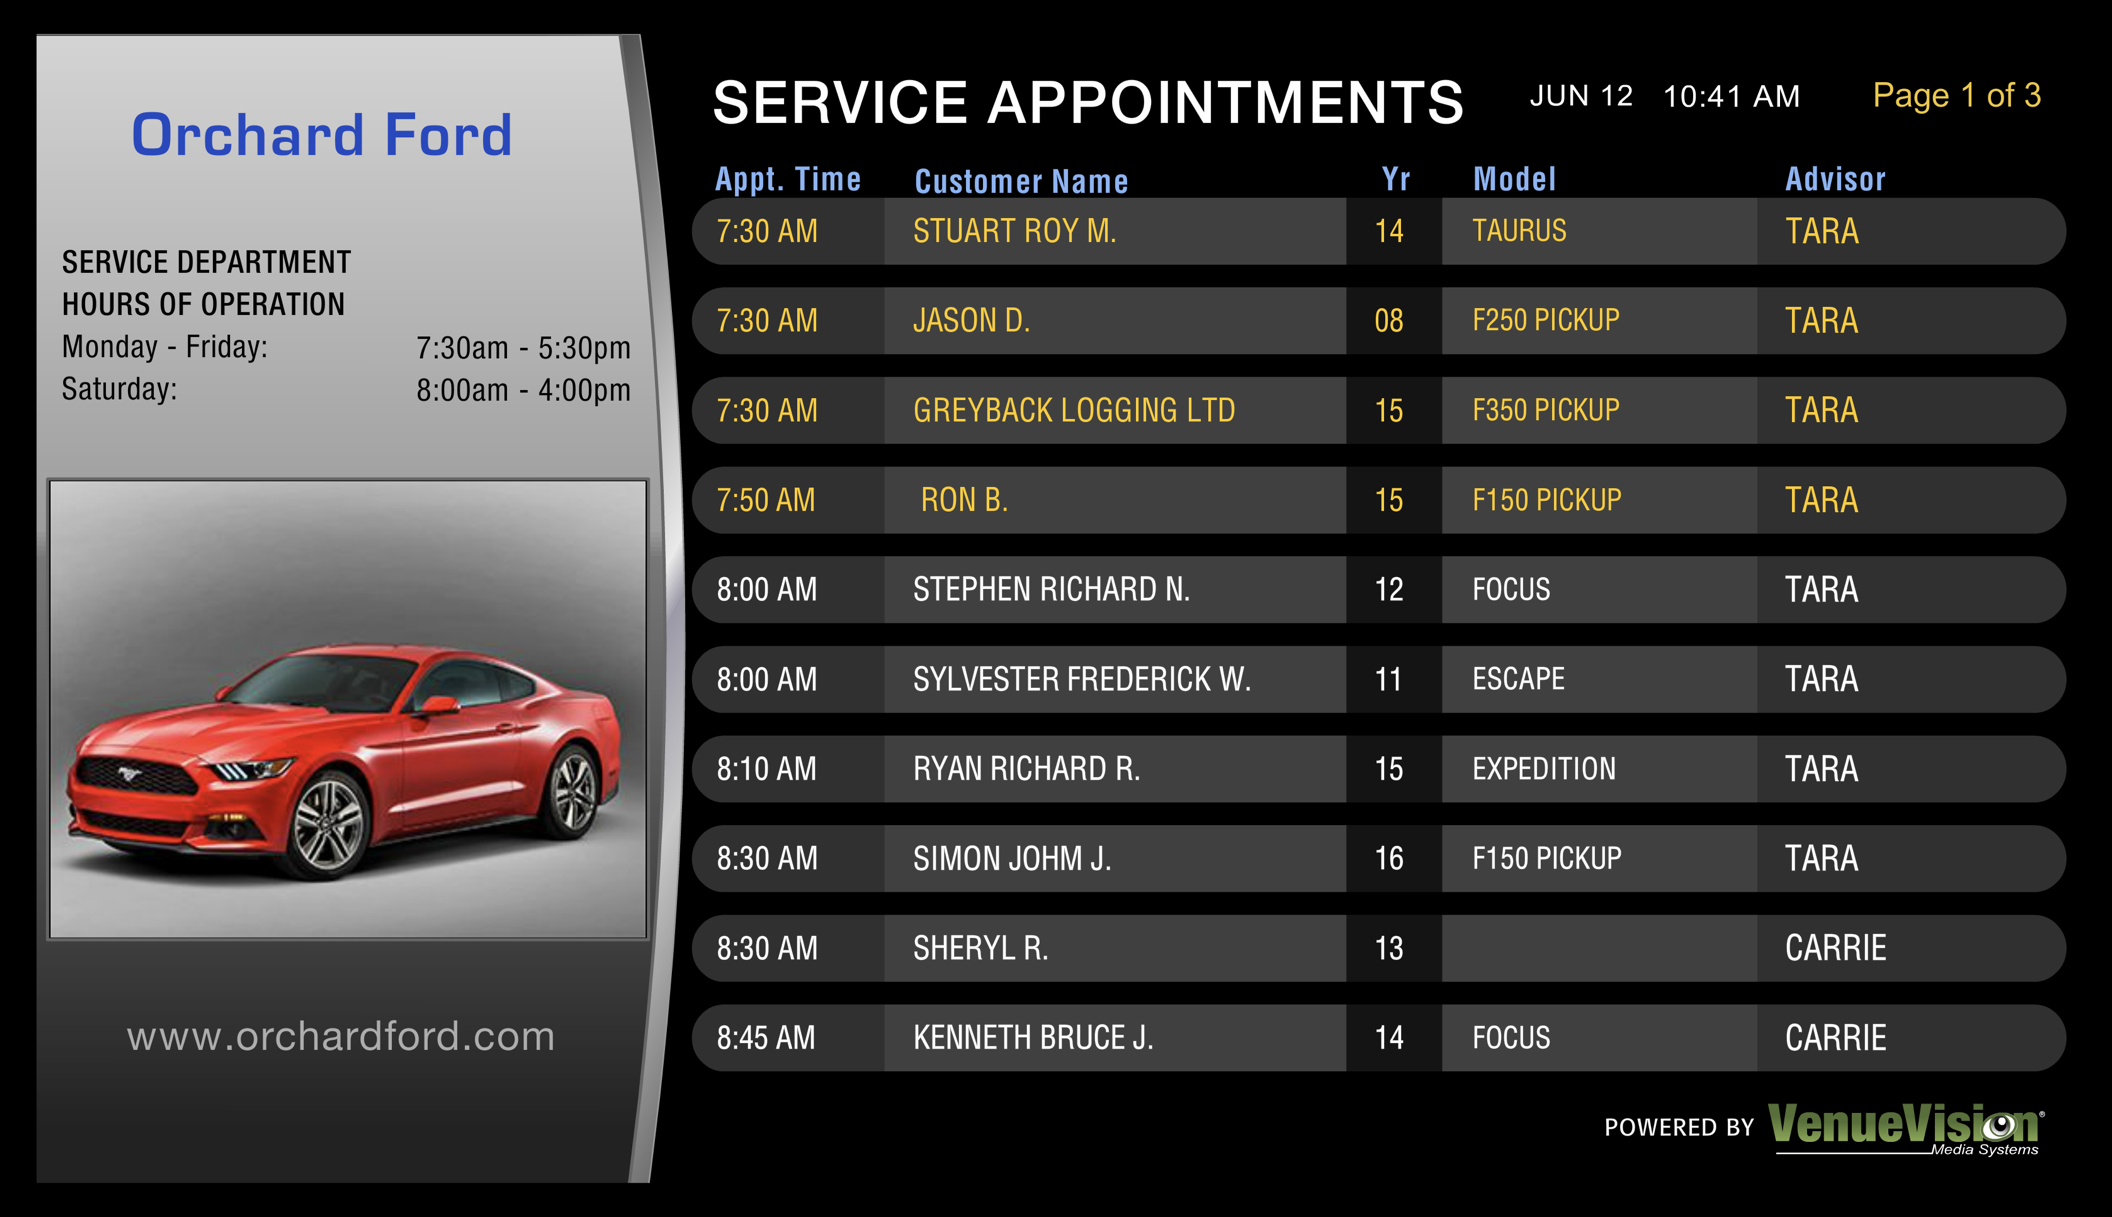 Service Appointment Dashboard with Orchard Ford dealership. A VenueVision solution approved and integrated with CDK.